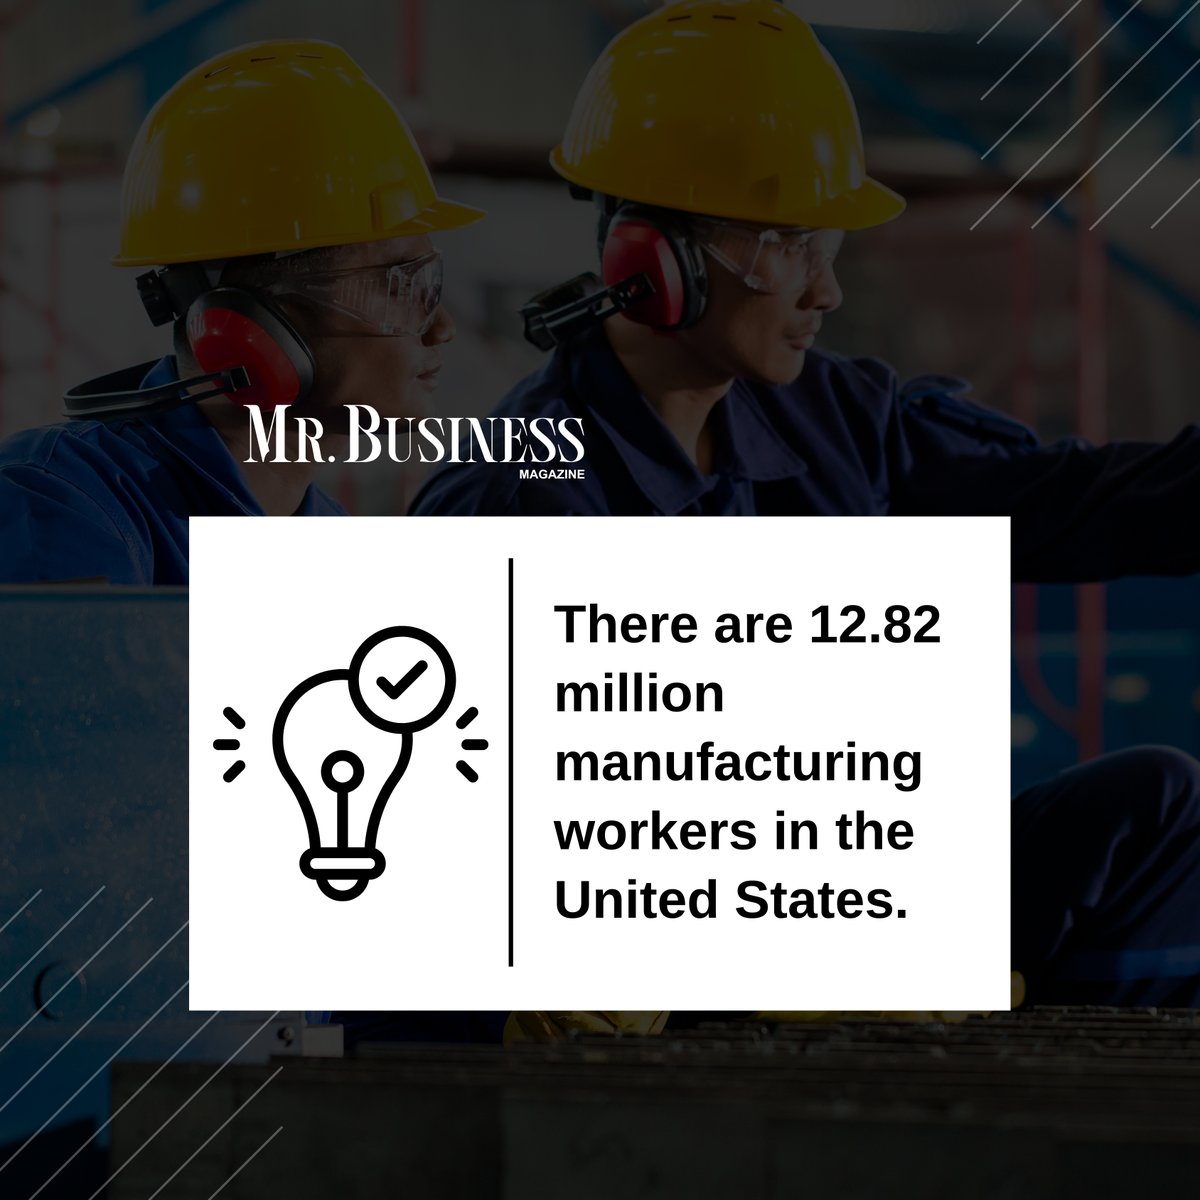 ✔Manufacturing generates immense employment opportunities. Here’s a fact to prove the point.
📕For More Information
Read  - mrbusinessmagazine.com
and Get Insightful ideas

#EmploymentOpportunities #JobCreation #EconomicImpact #ManufacturingStatistics #MrBusinessMagazine